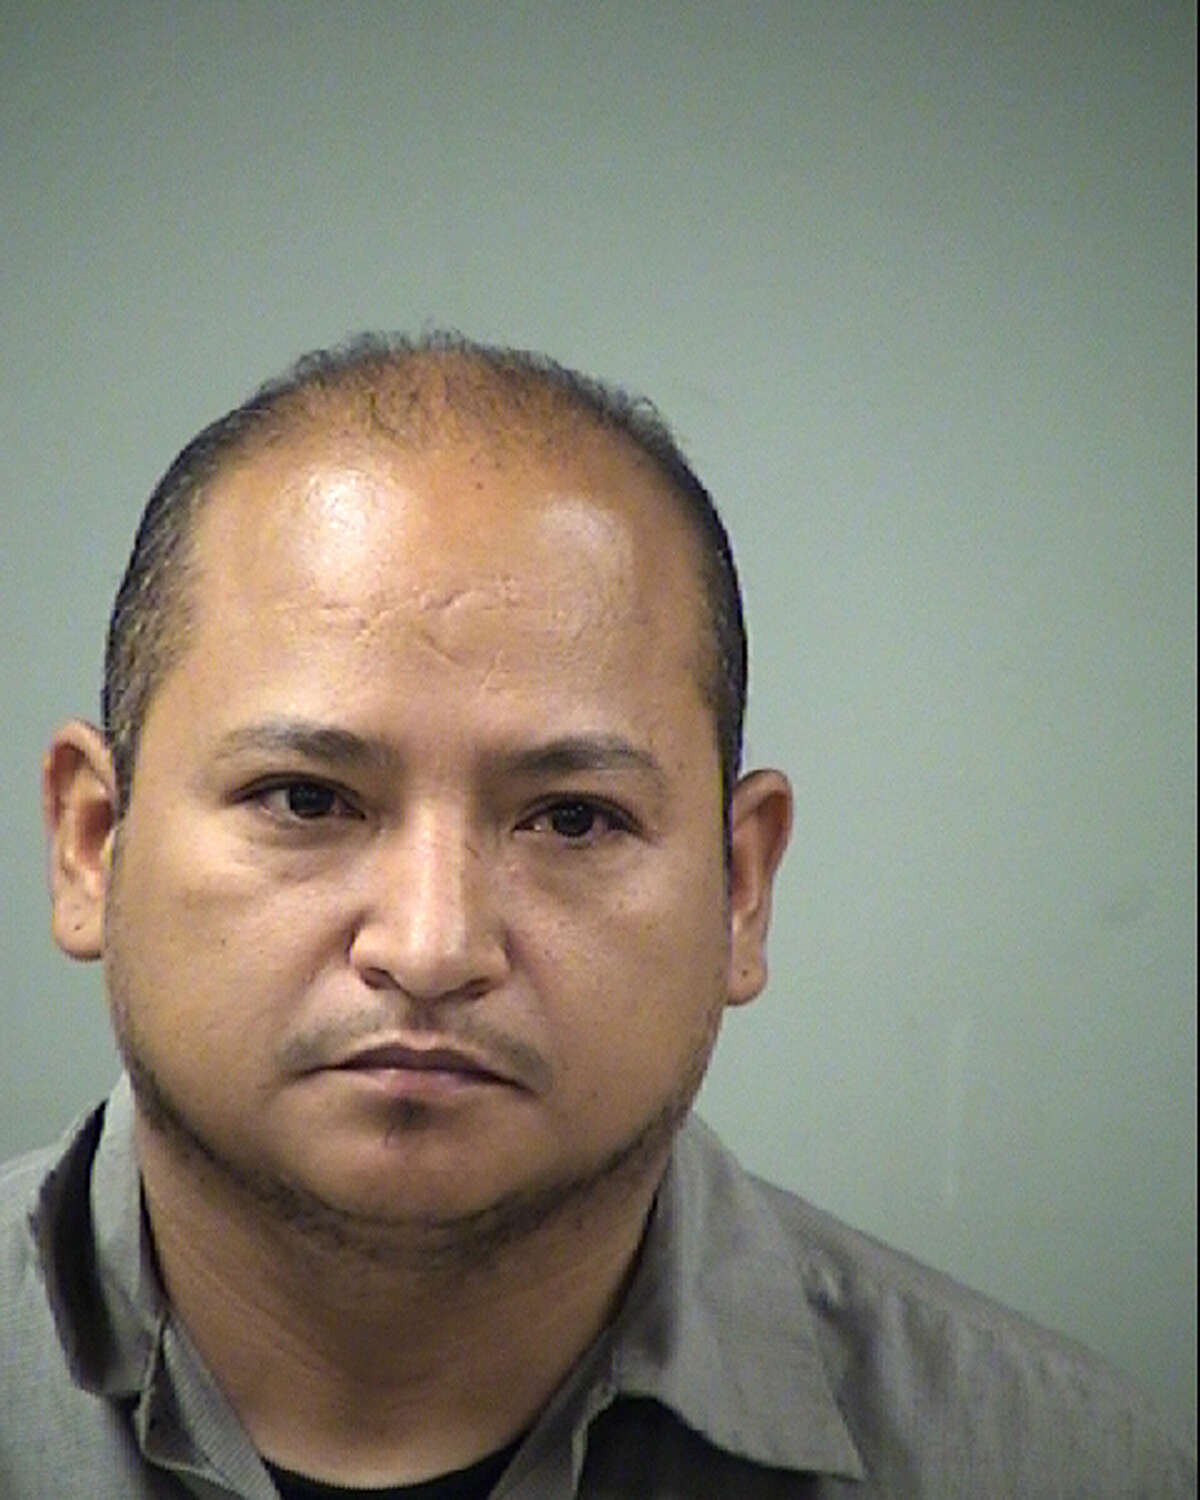 Daniel Ortiz Jr., 43, is charged with theft.